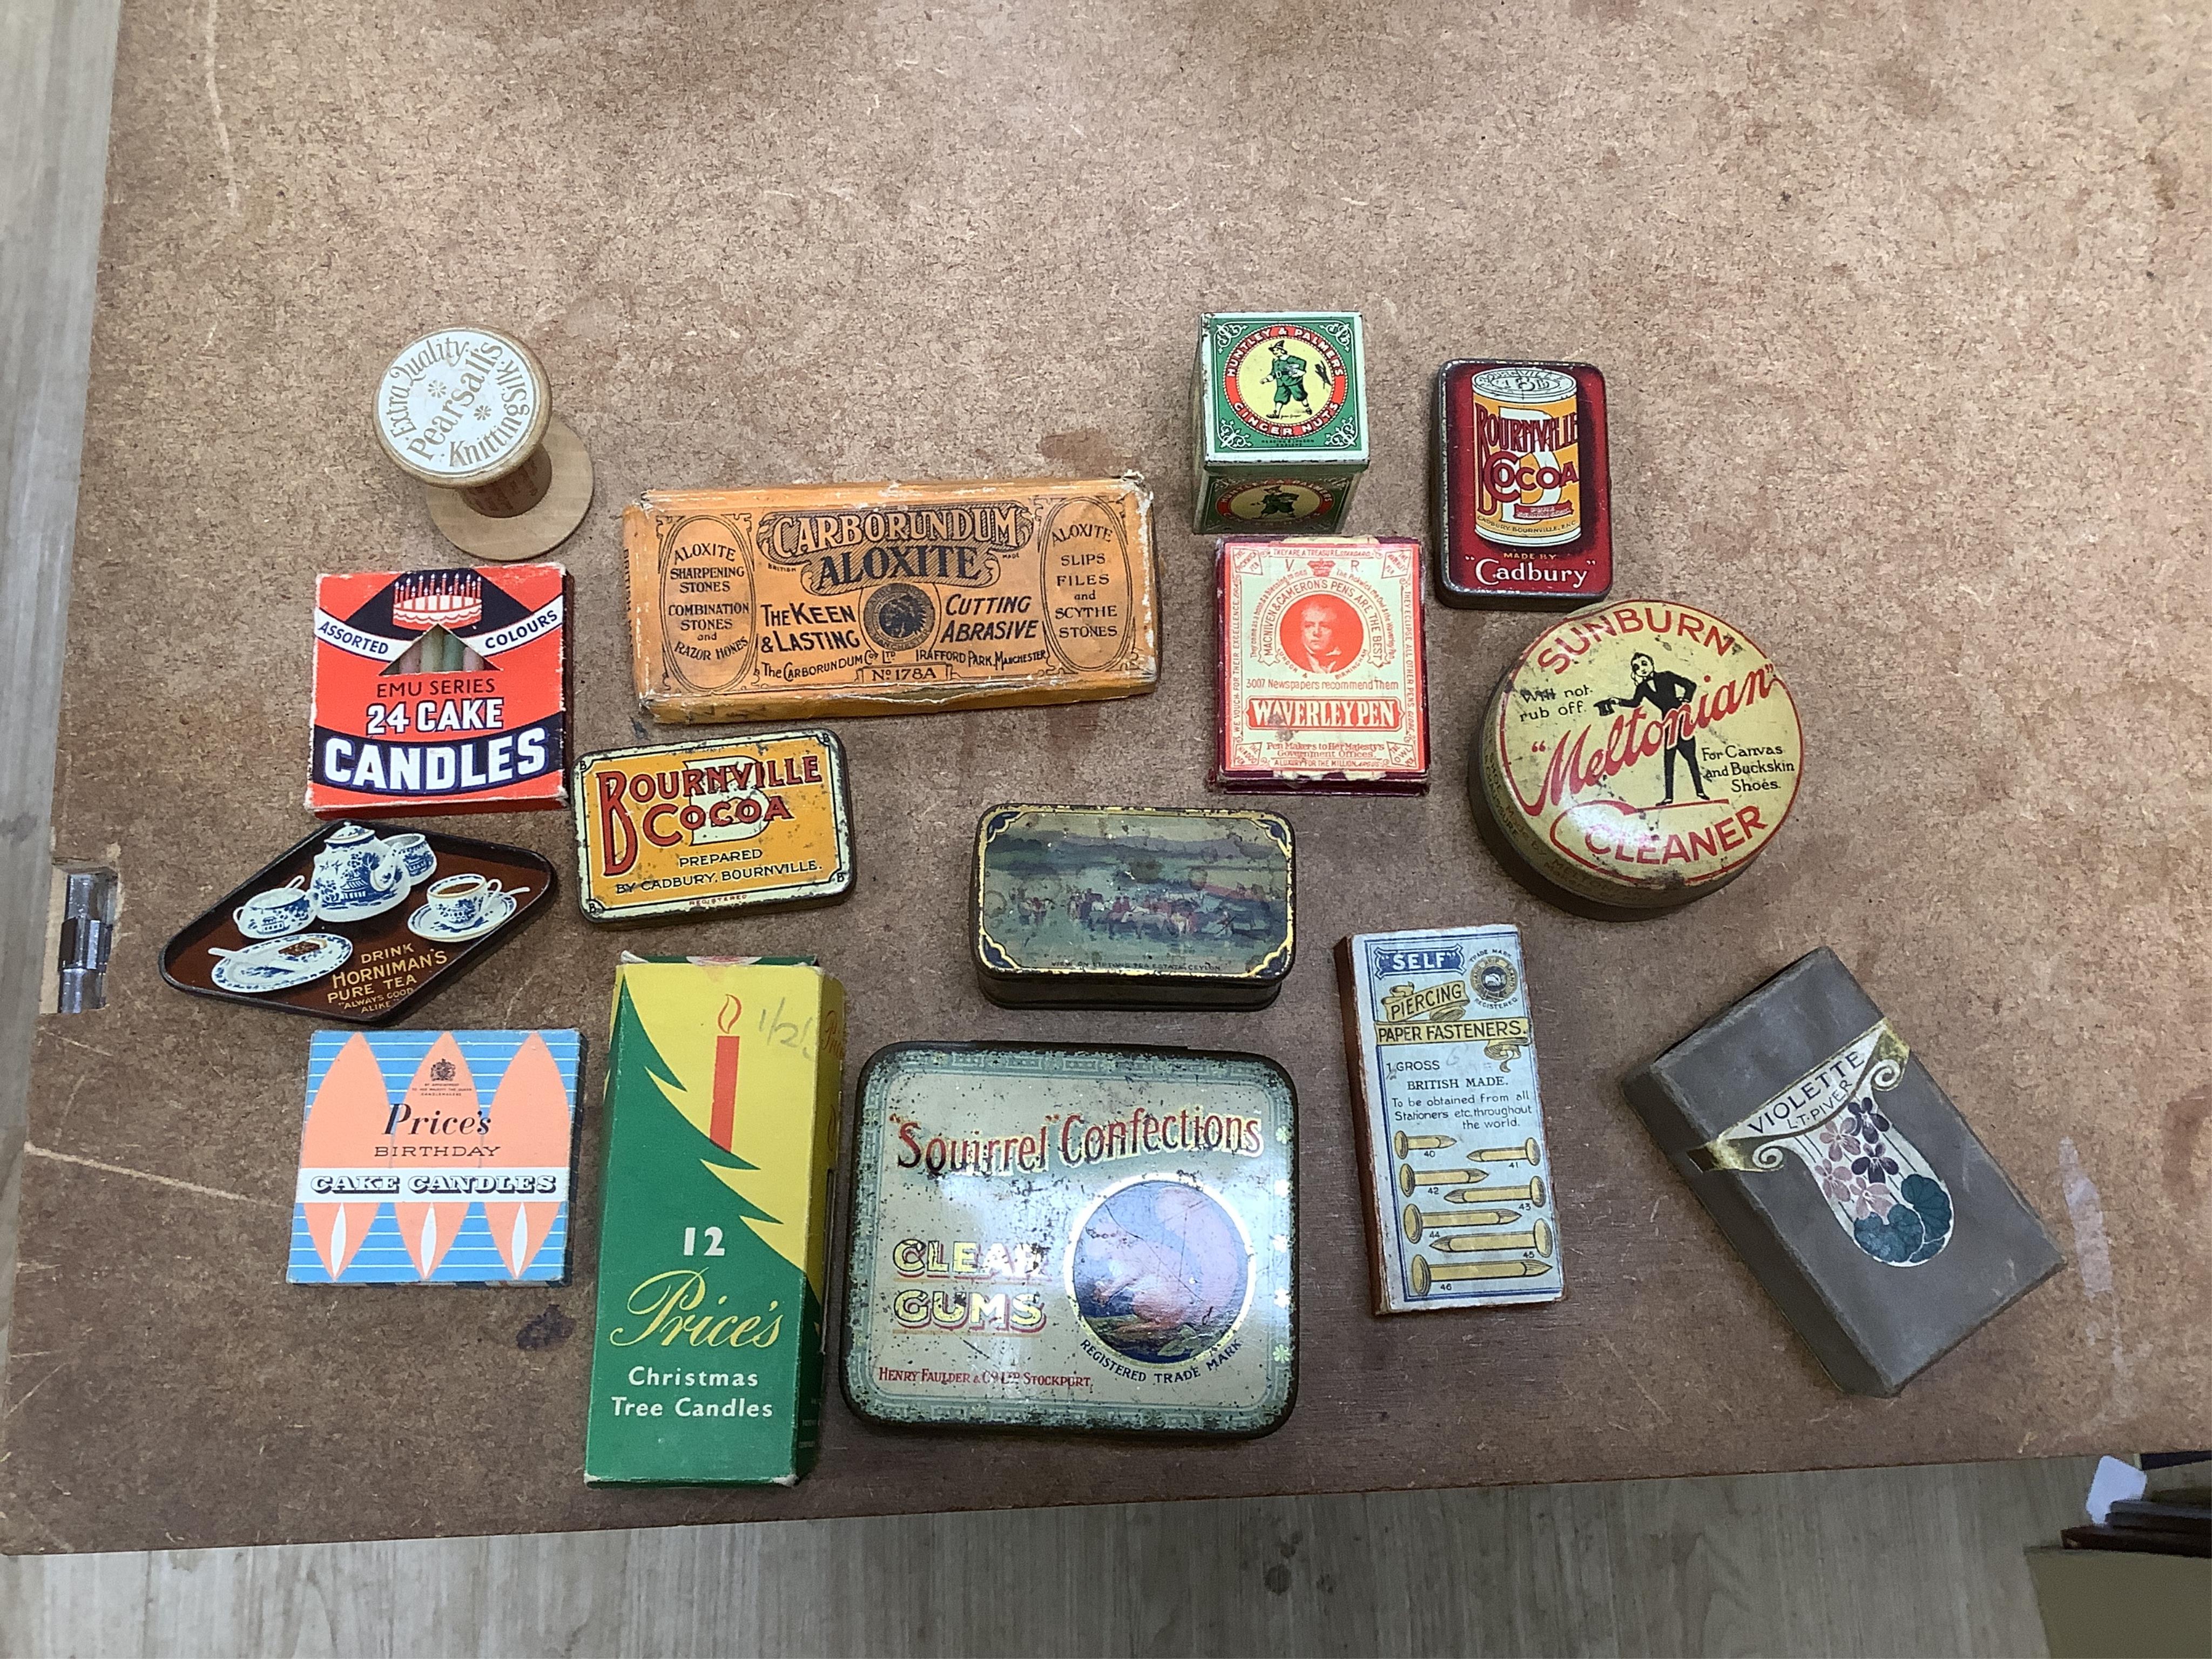 A quantity of early / mid 20th century advertising and confectionery tins. Condition - poor to fair